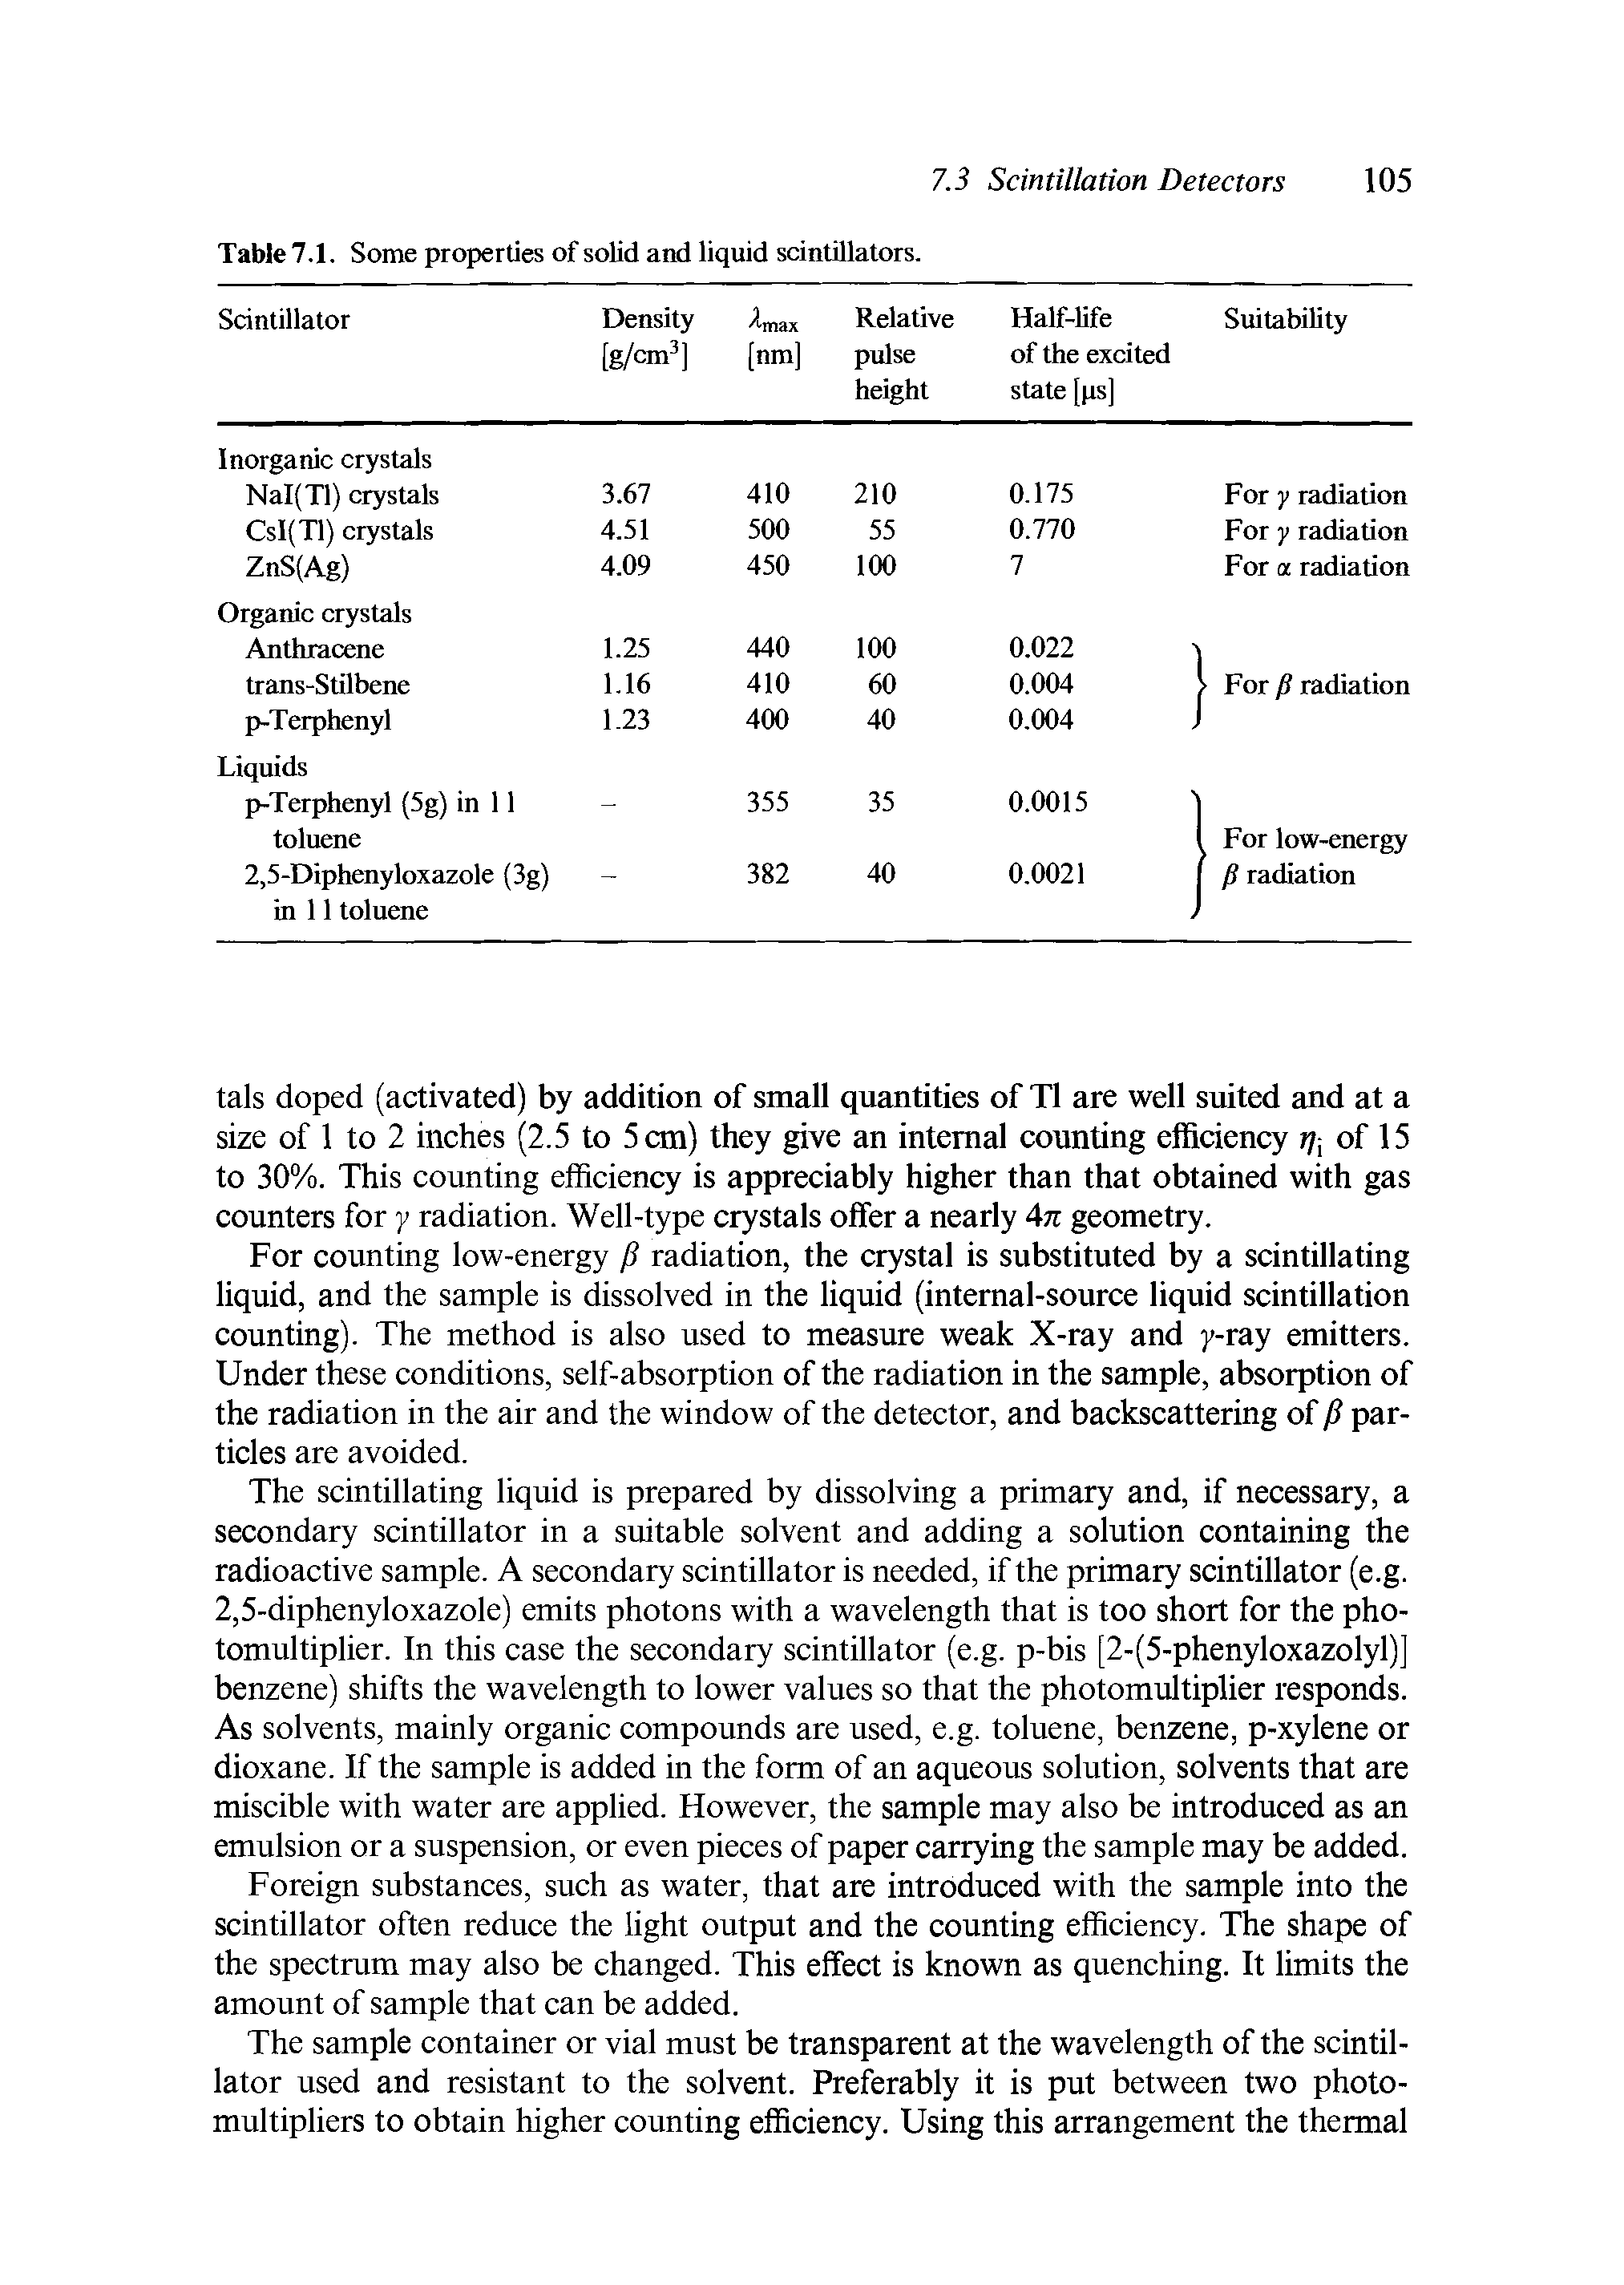 Table .1. Some properties of solid and liquid scintillators.